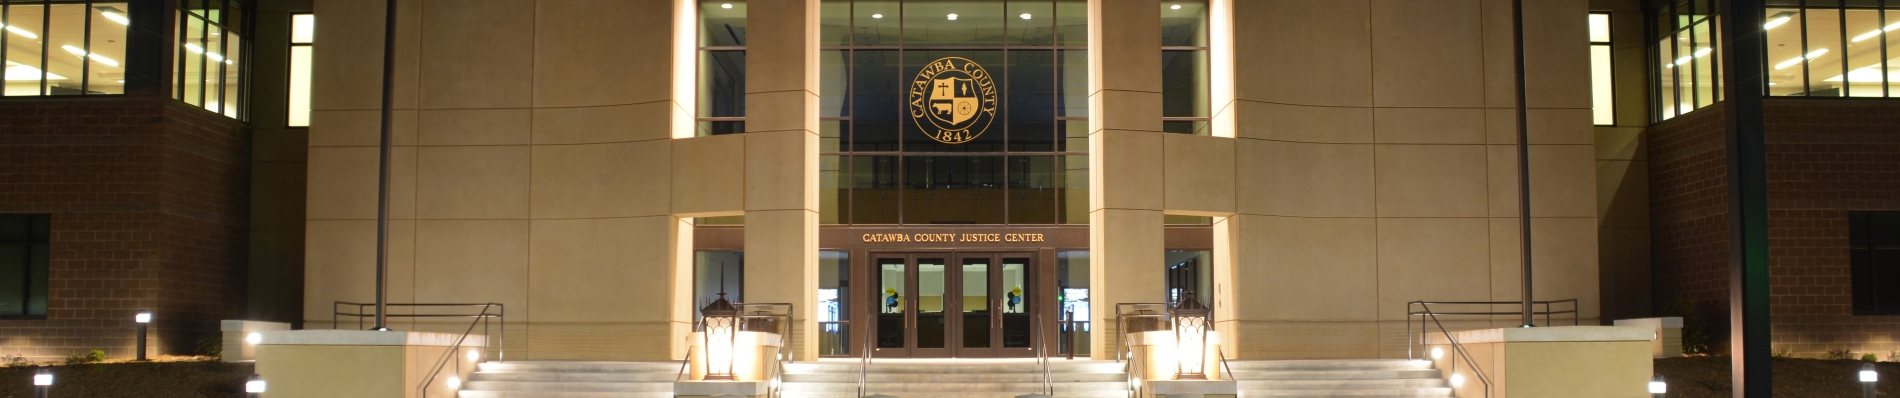 Crop of Newton Justice Center at Night